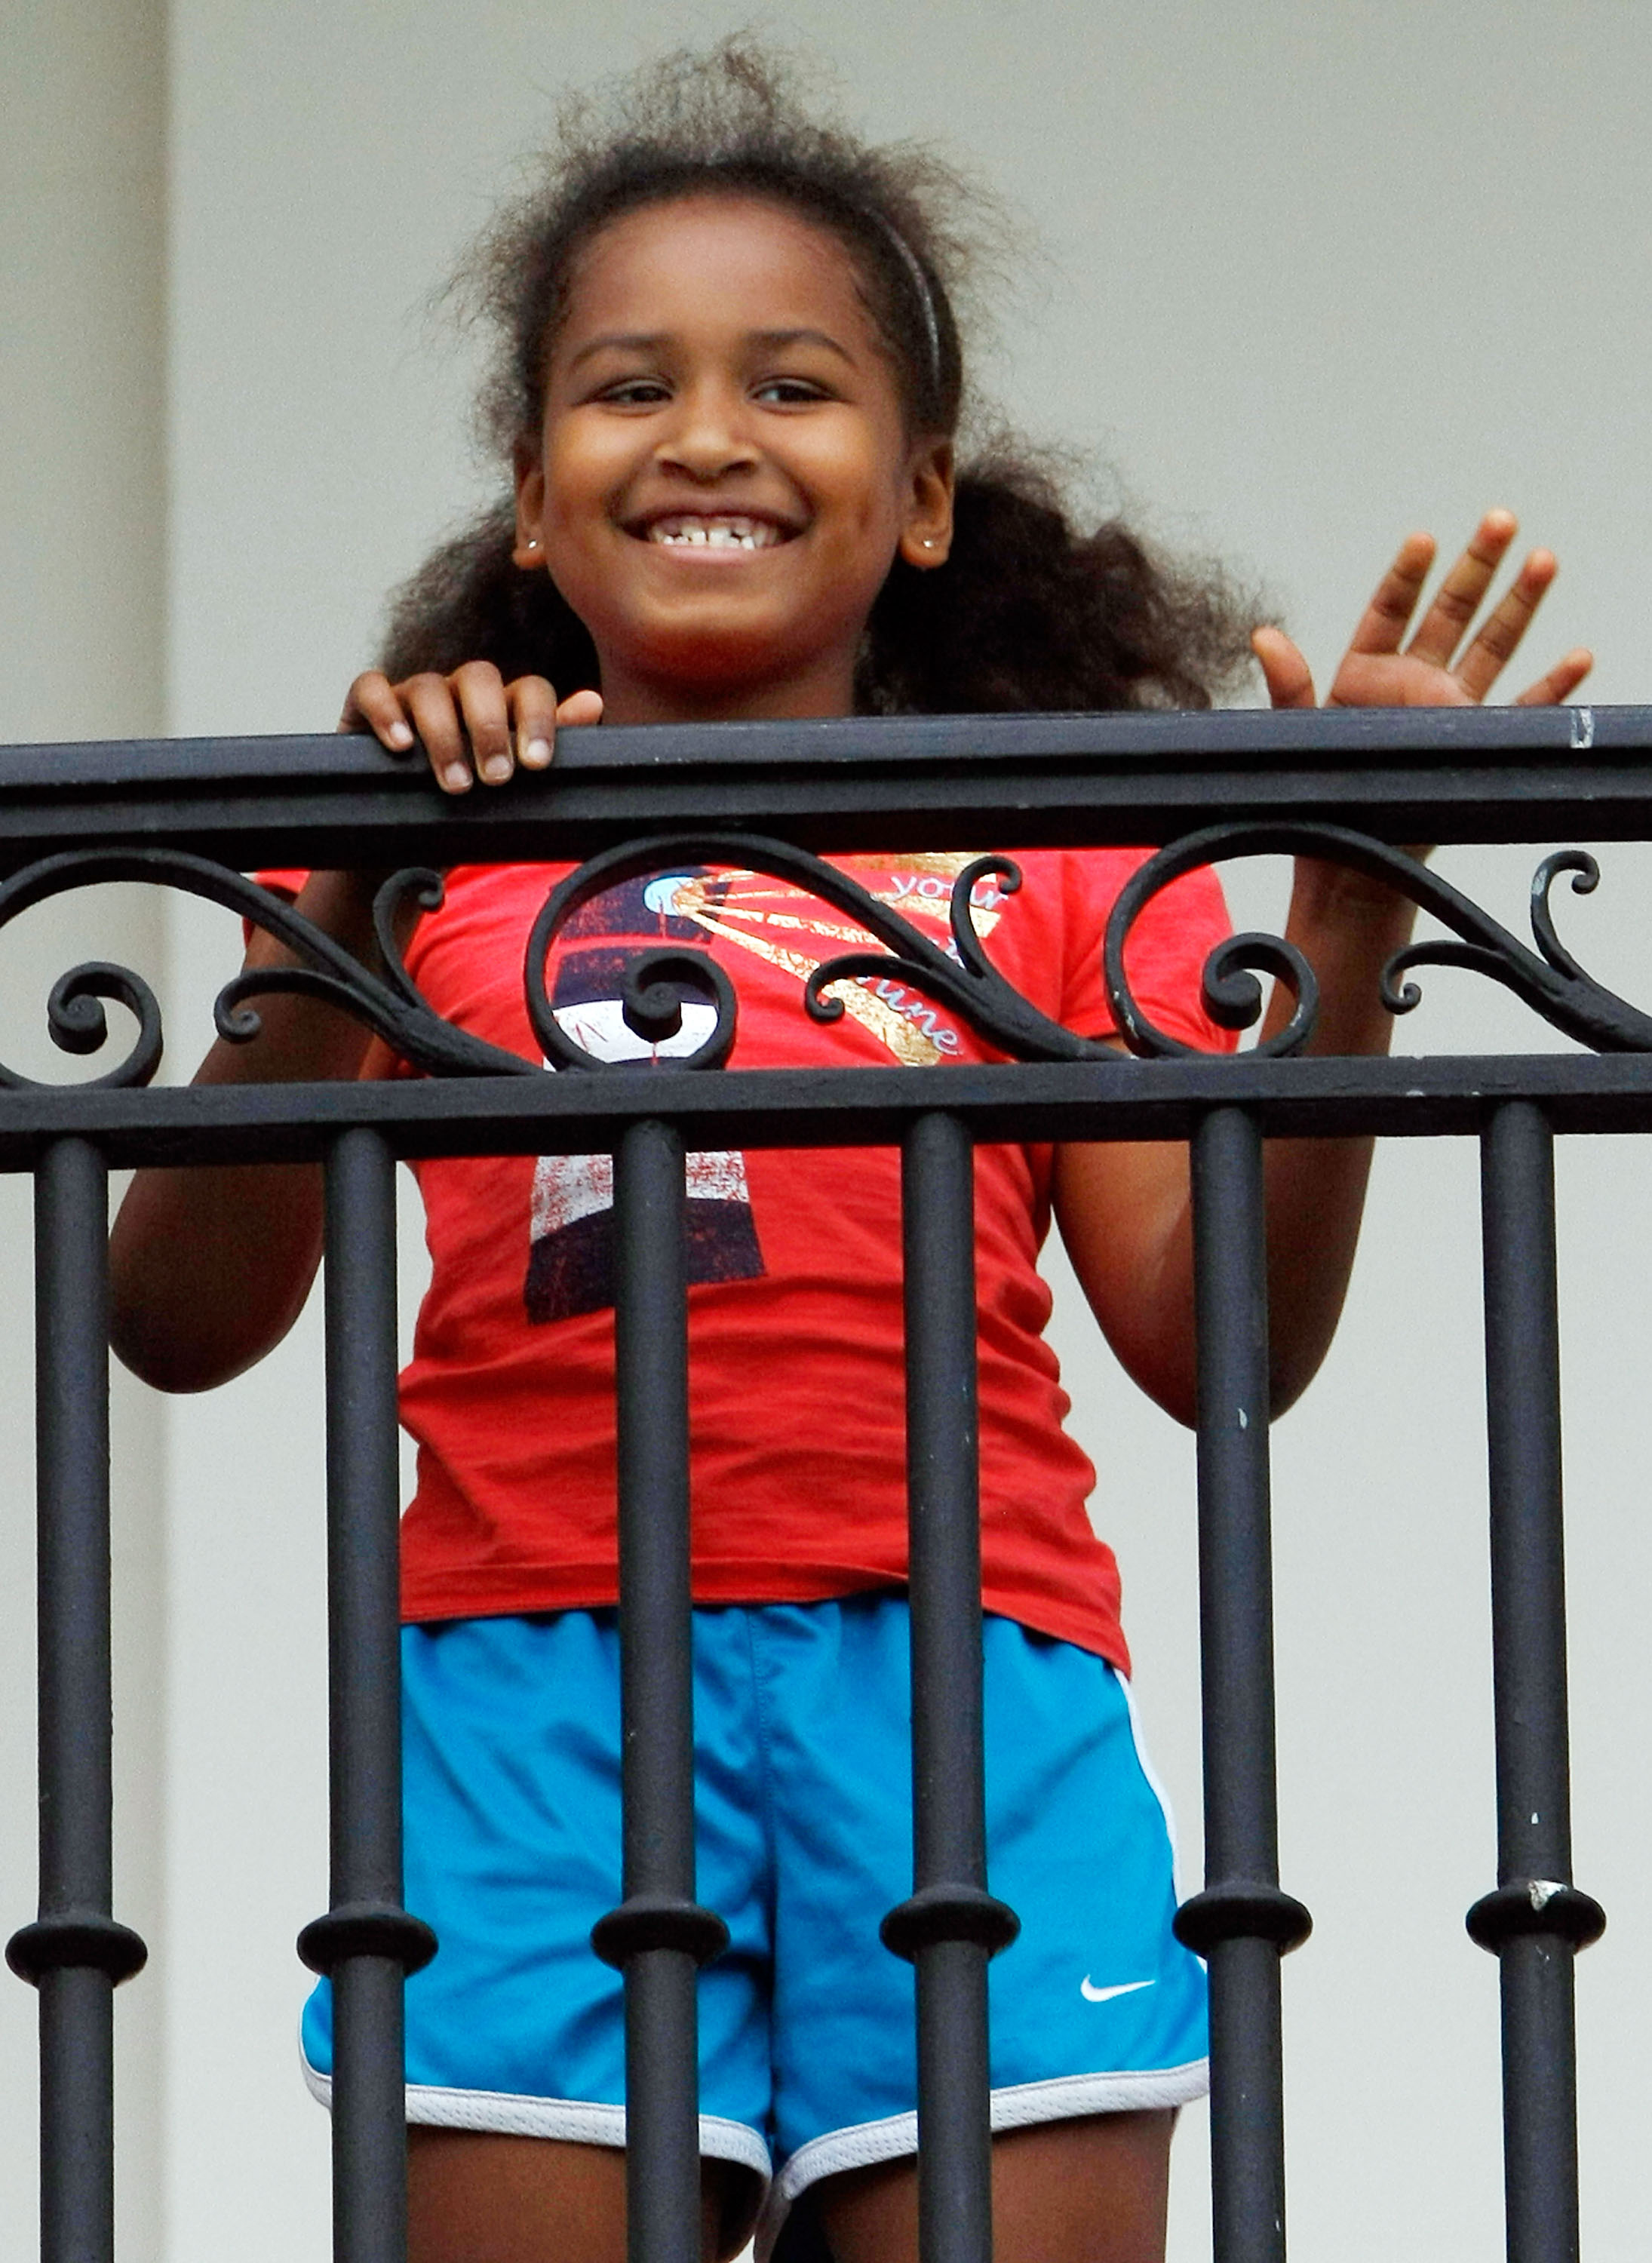 Sasha Obama waves to Barack Obama after he came back from a trip in Washington, D.C. on May 14, 2009. | Source: Getty Images